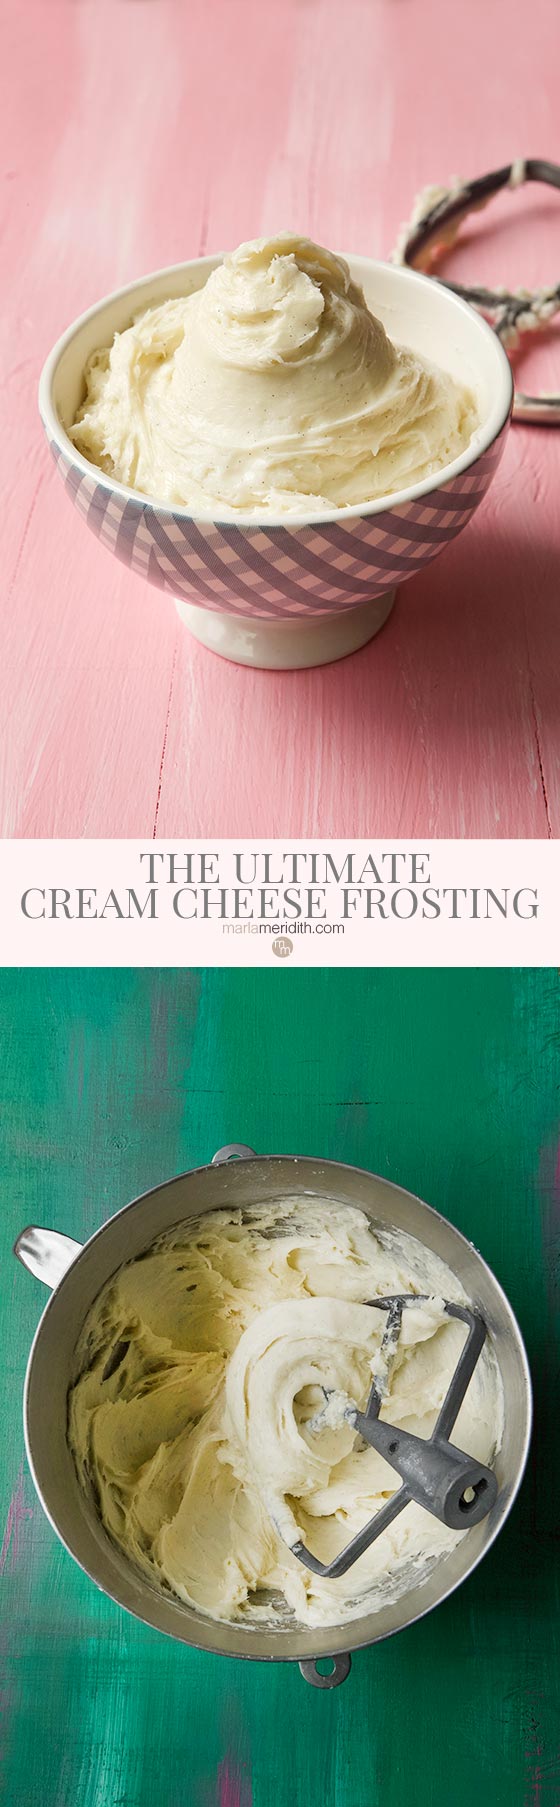 This is our absolute favorite Ultimate Cream Cheese Frosting recipe for cupcakes, cake & frosted cookies. Comes together in just 3 minutes! MarlaMeridith.com